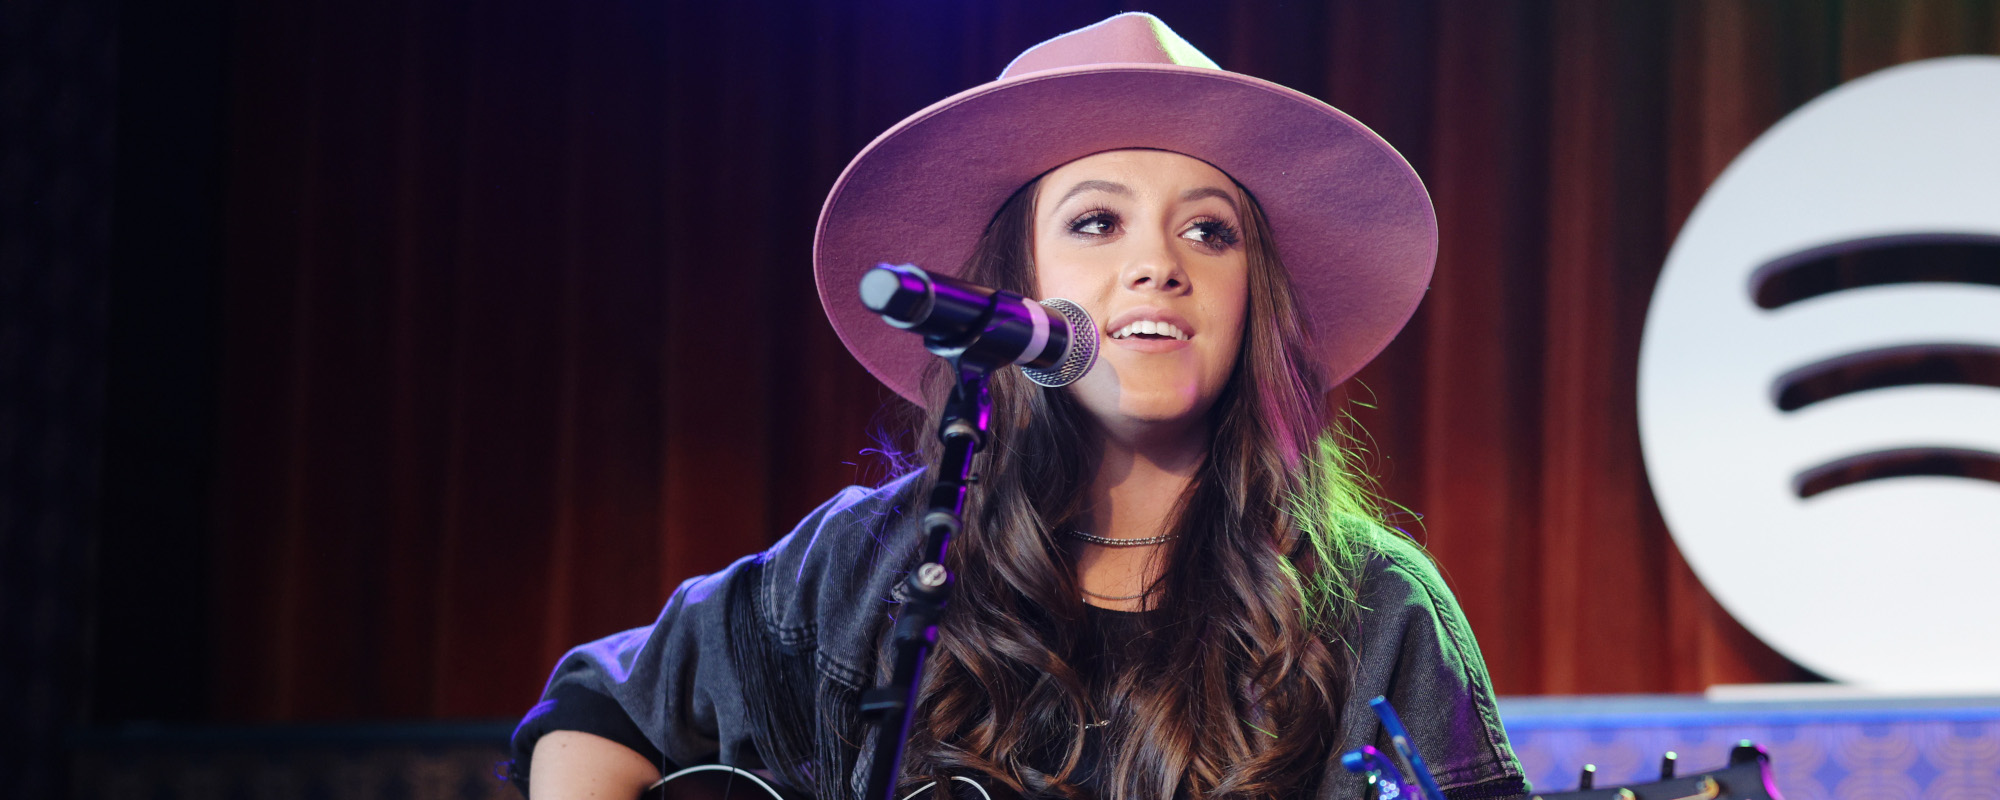 Maggie Baugh Keeps it Real with “Seein’ Somebody” During CMA Fest Performance